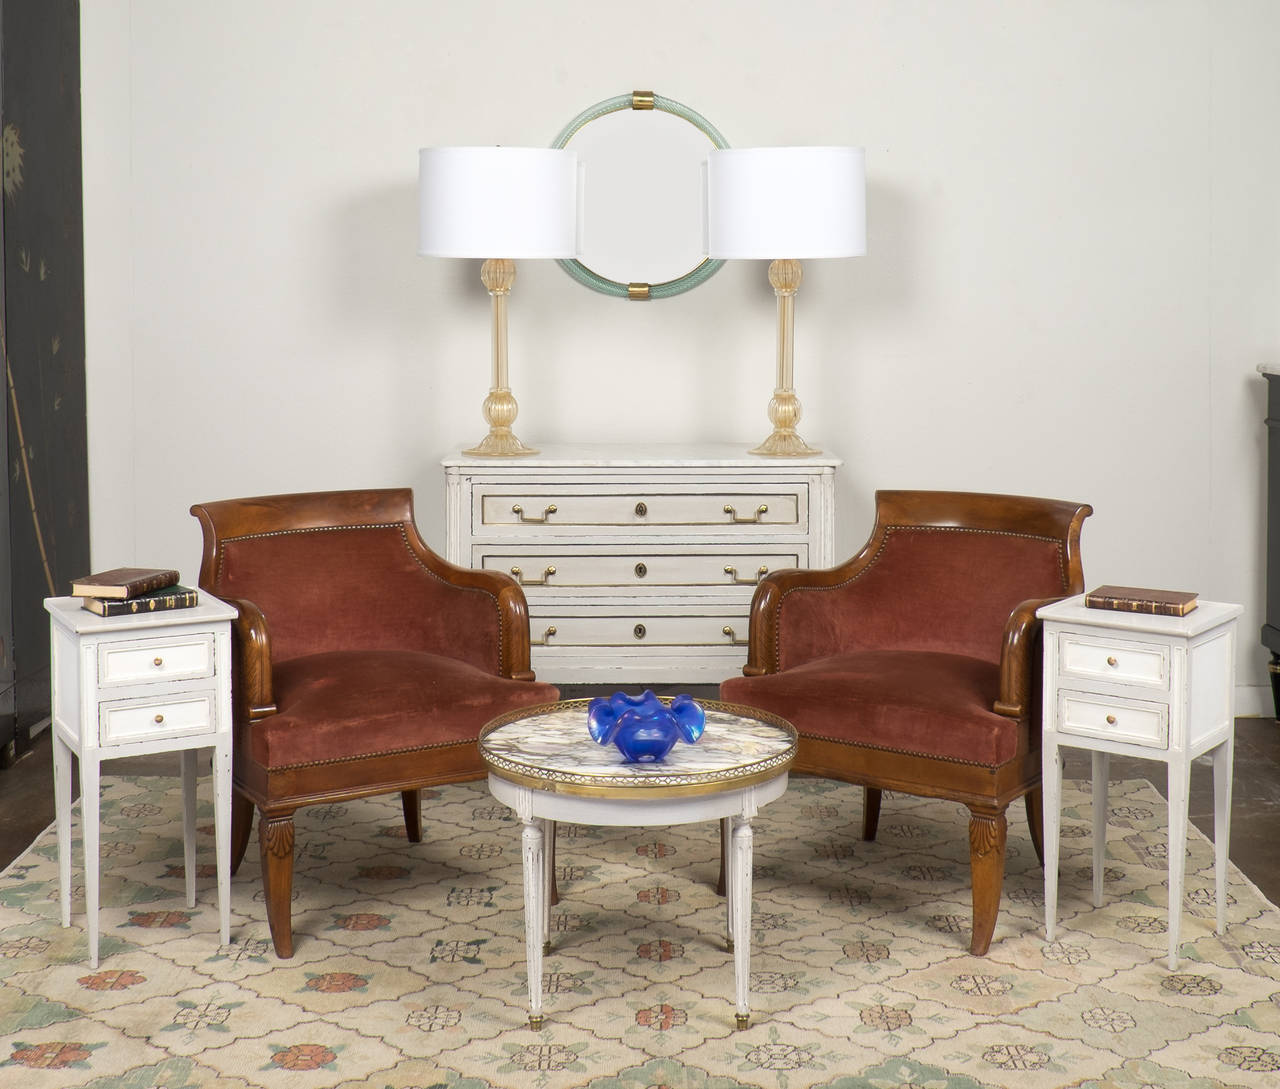 Precious antique pair of French Directoire style side tables in hand-painted fruitwood, each with two dovetailed drawers and tapered legs. Perfect size and proportion for so many areas, we loved the fresh look and the Classic proportions of these